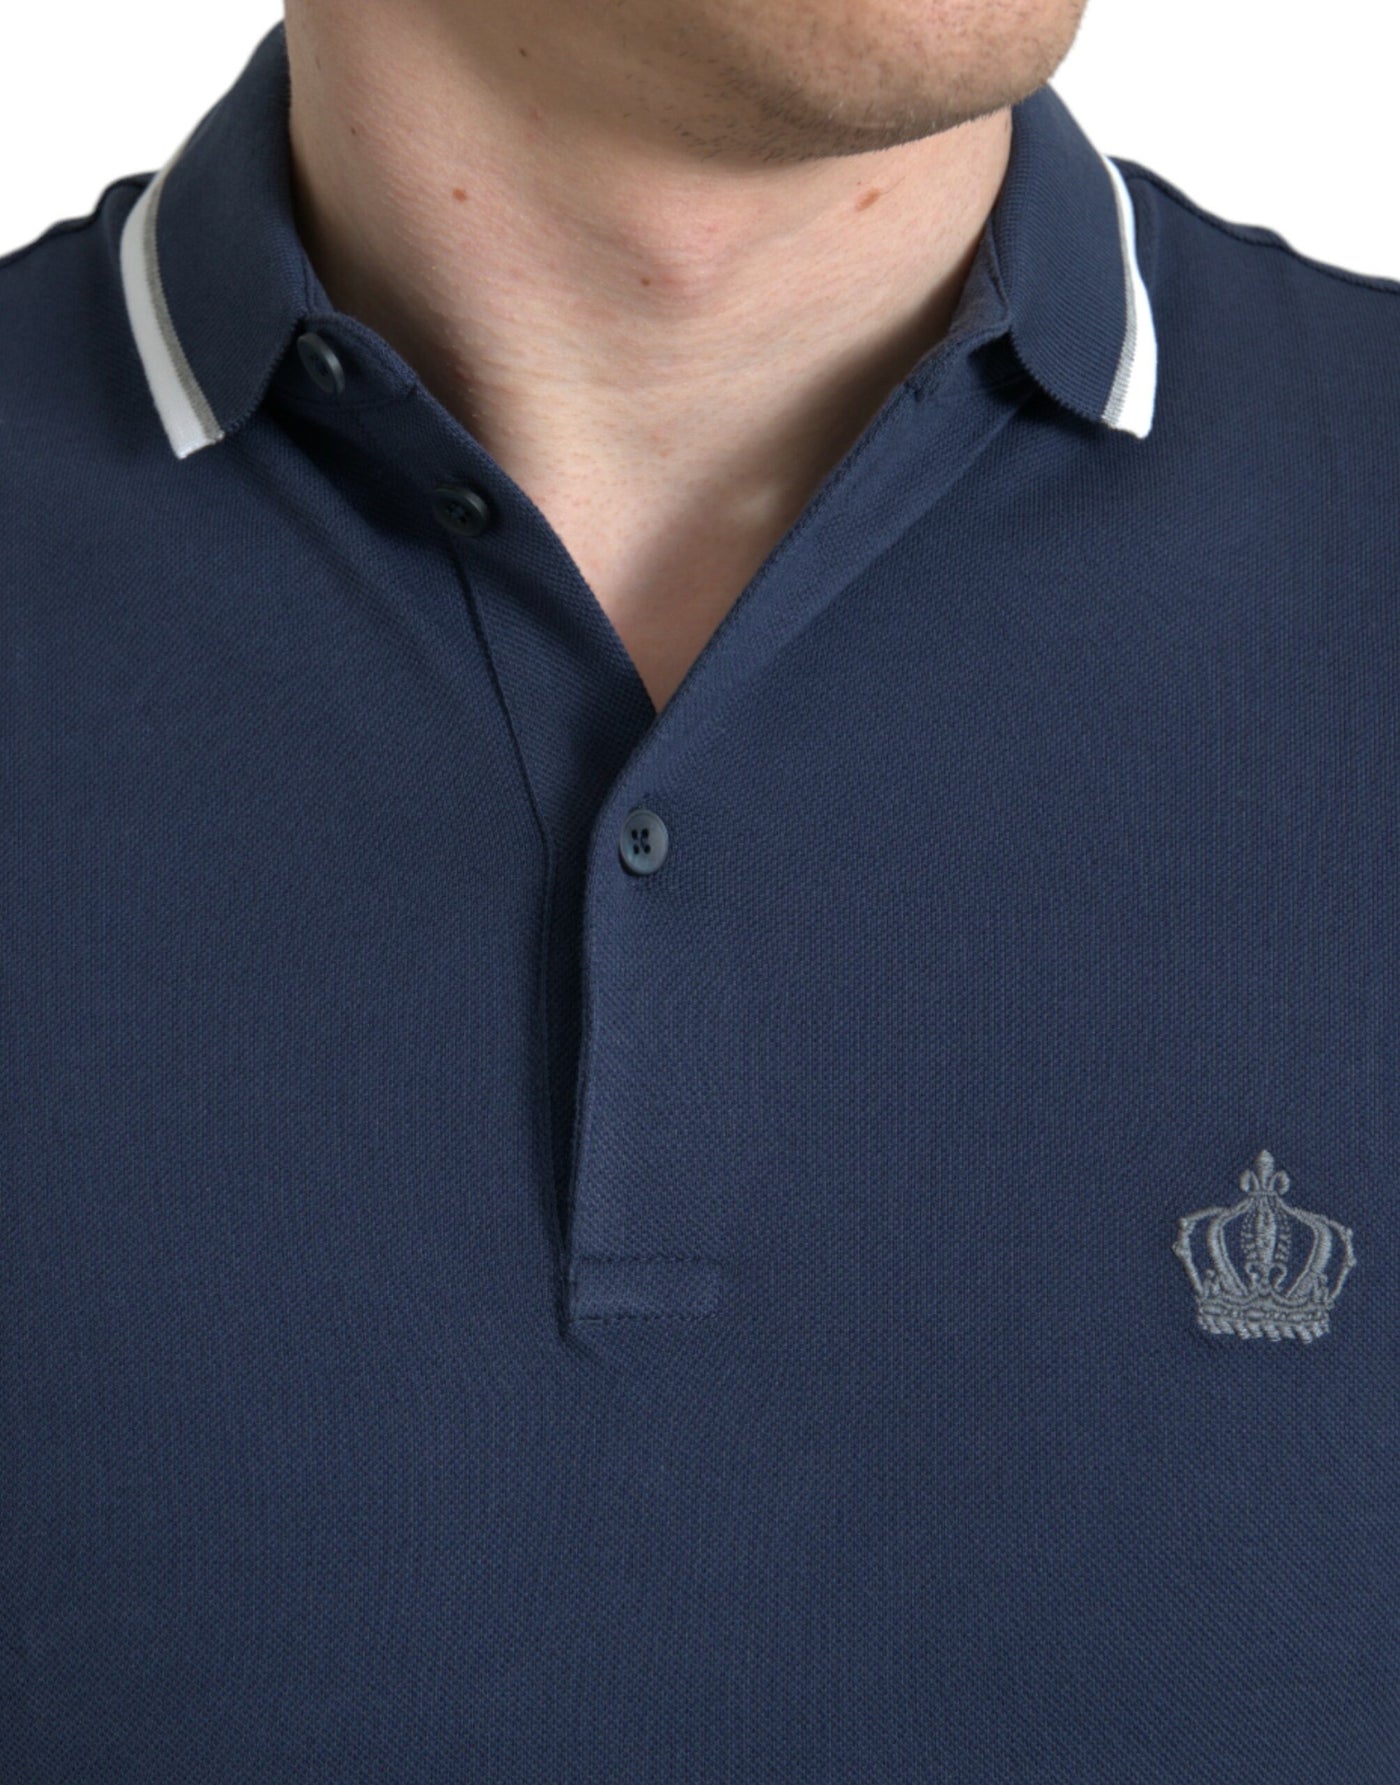 Dolce & Gabbana Elegant Crown Embroidered Polo T-Shirt